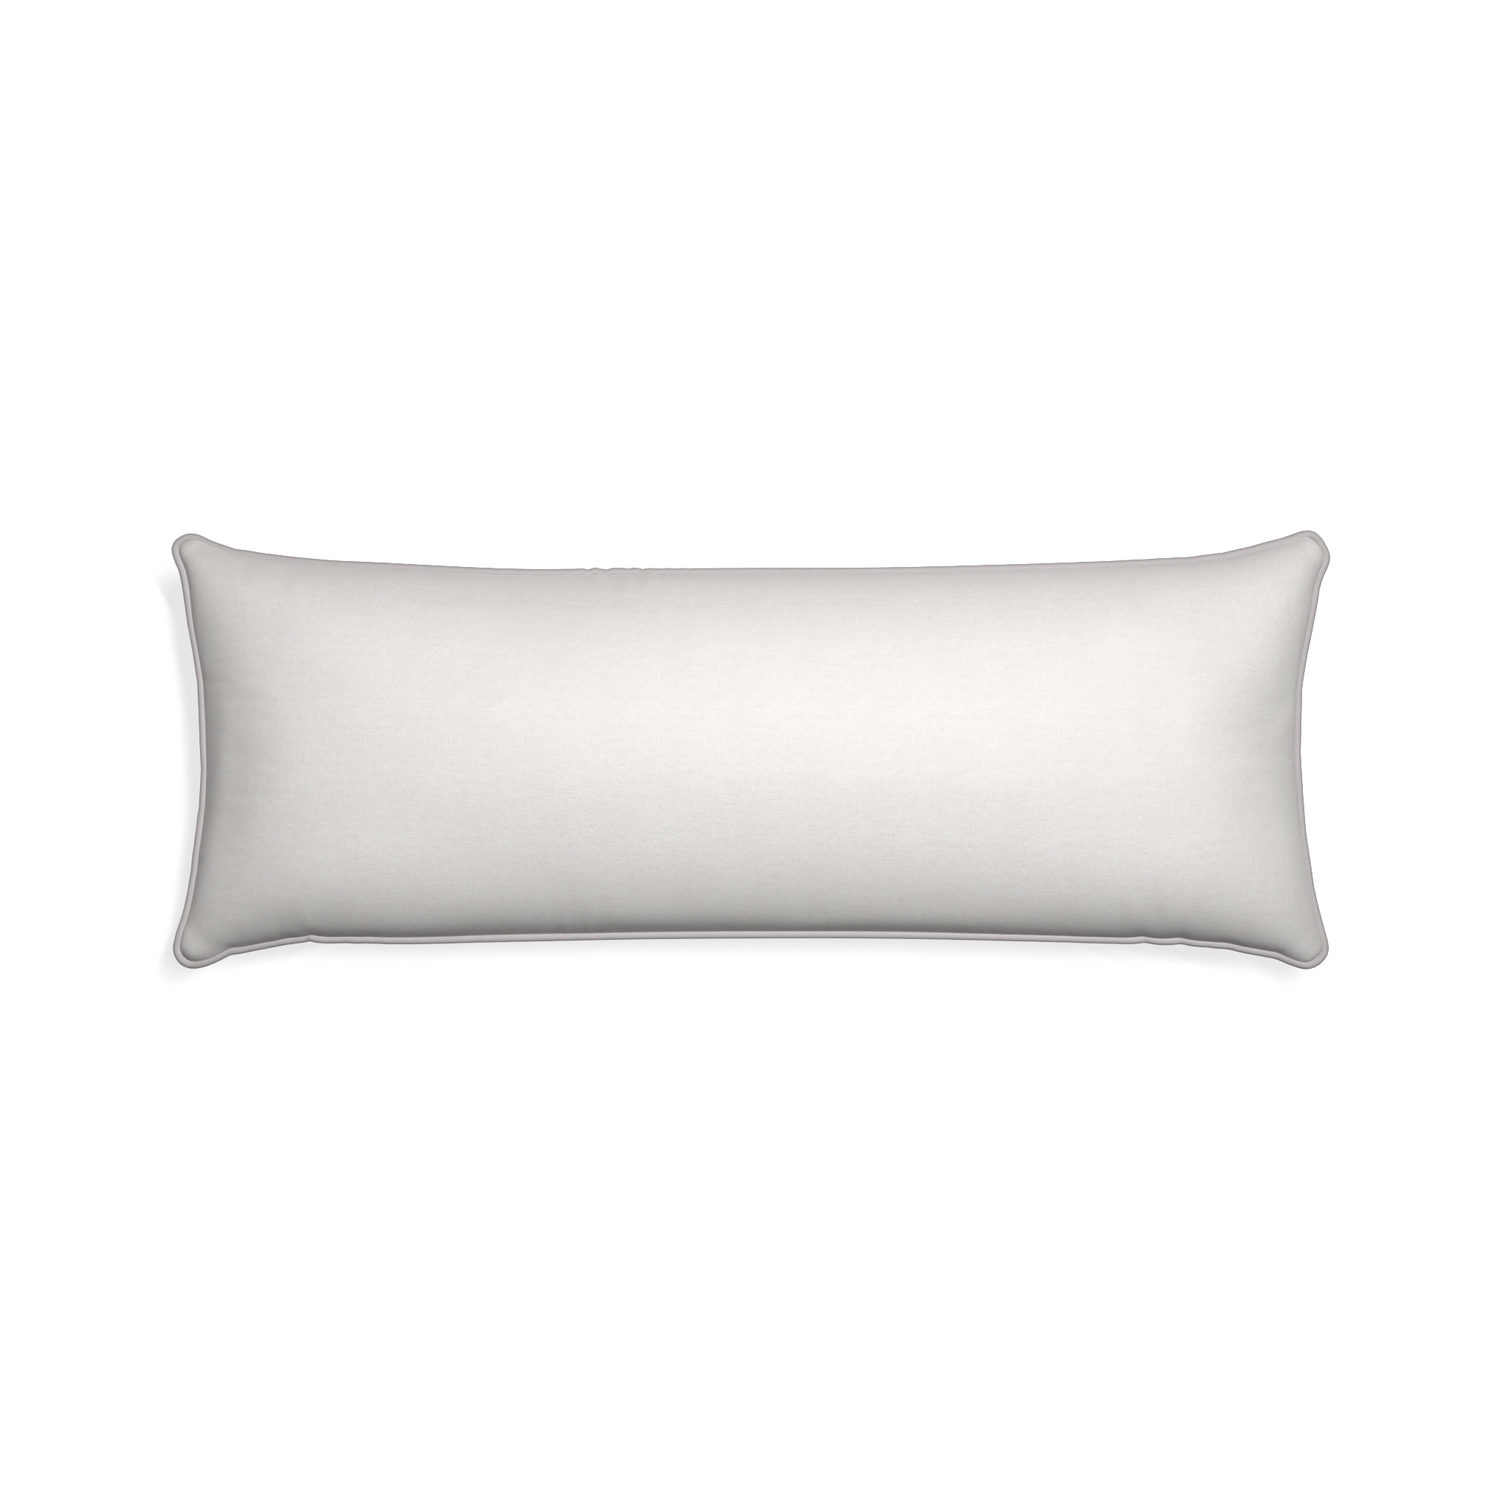 Xl-lumbar flour custom pillow with pebble piping on white background